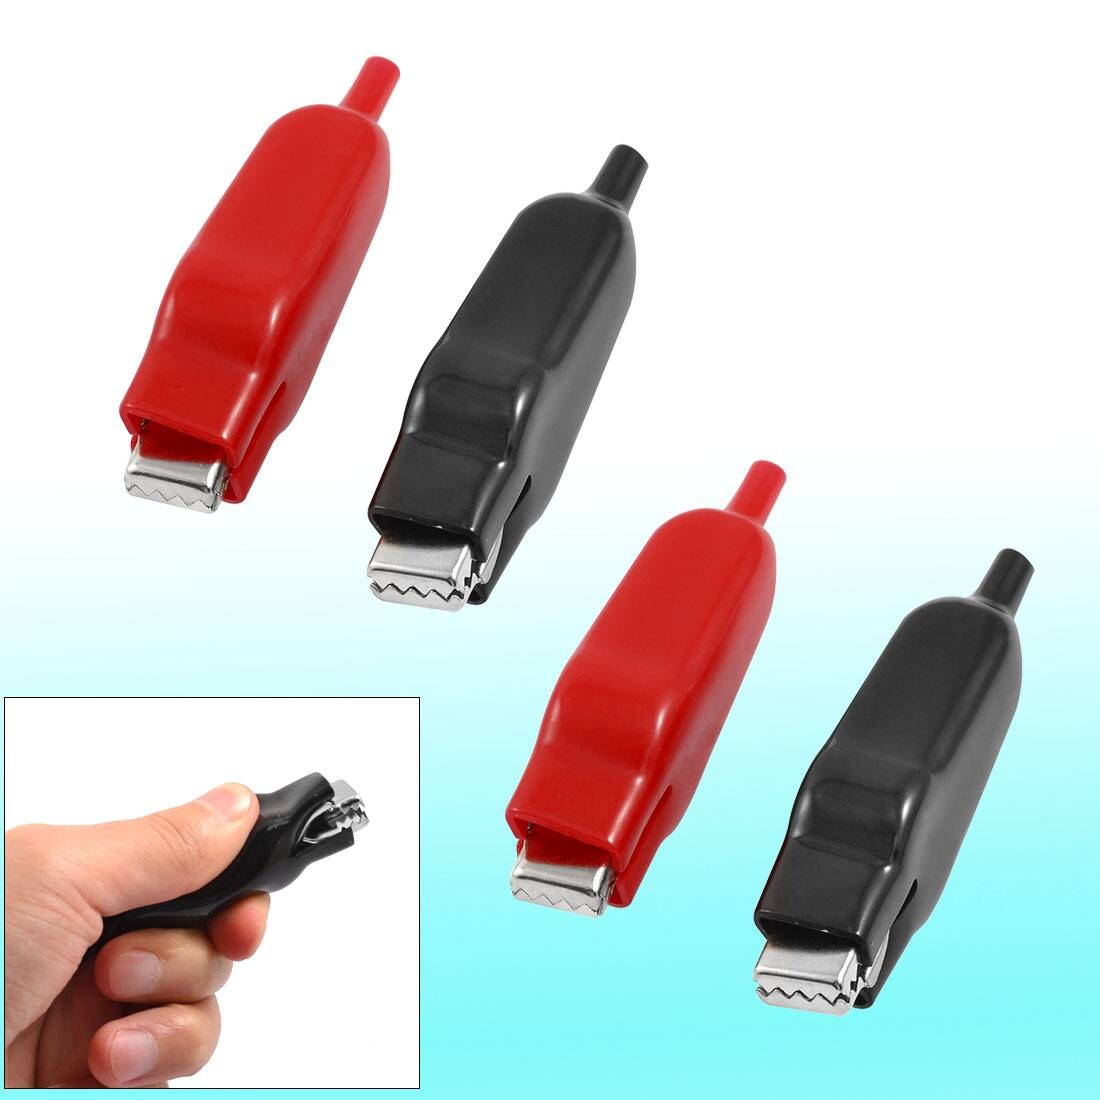 4 Pcs Plastic Coated Test Probe Alligator Clips 80mm Length - Black, Red, Silver Tone